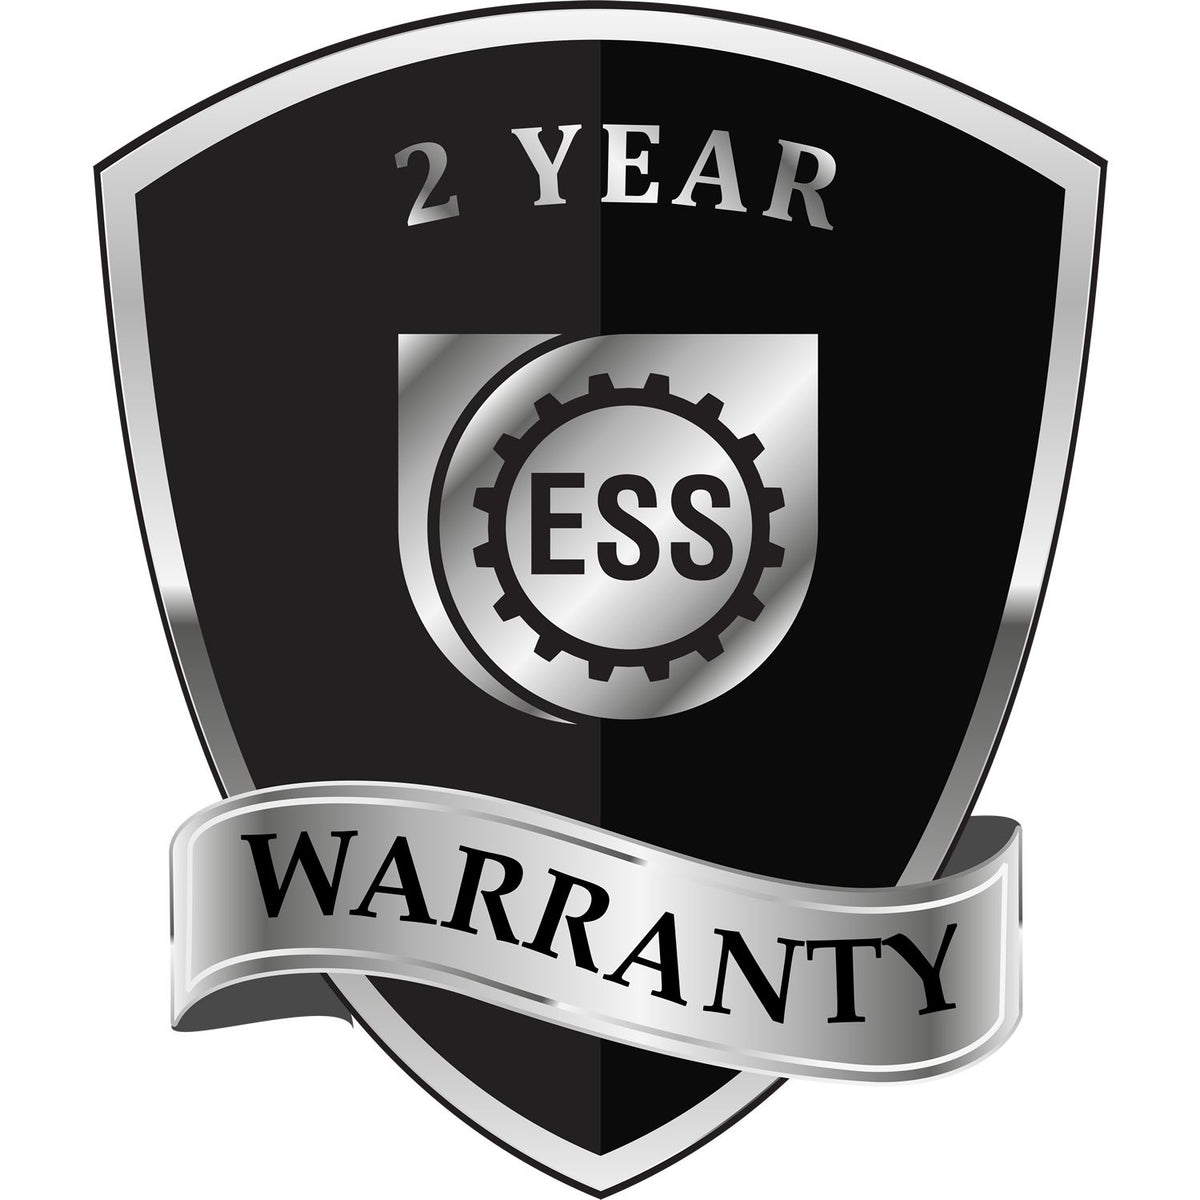 A badge or emblem showing a warranty icon for the Heavy Duty Cast Iron Illinois Engineer Seal Embosser